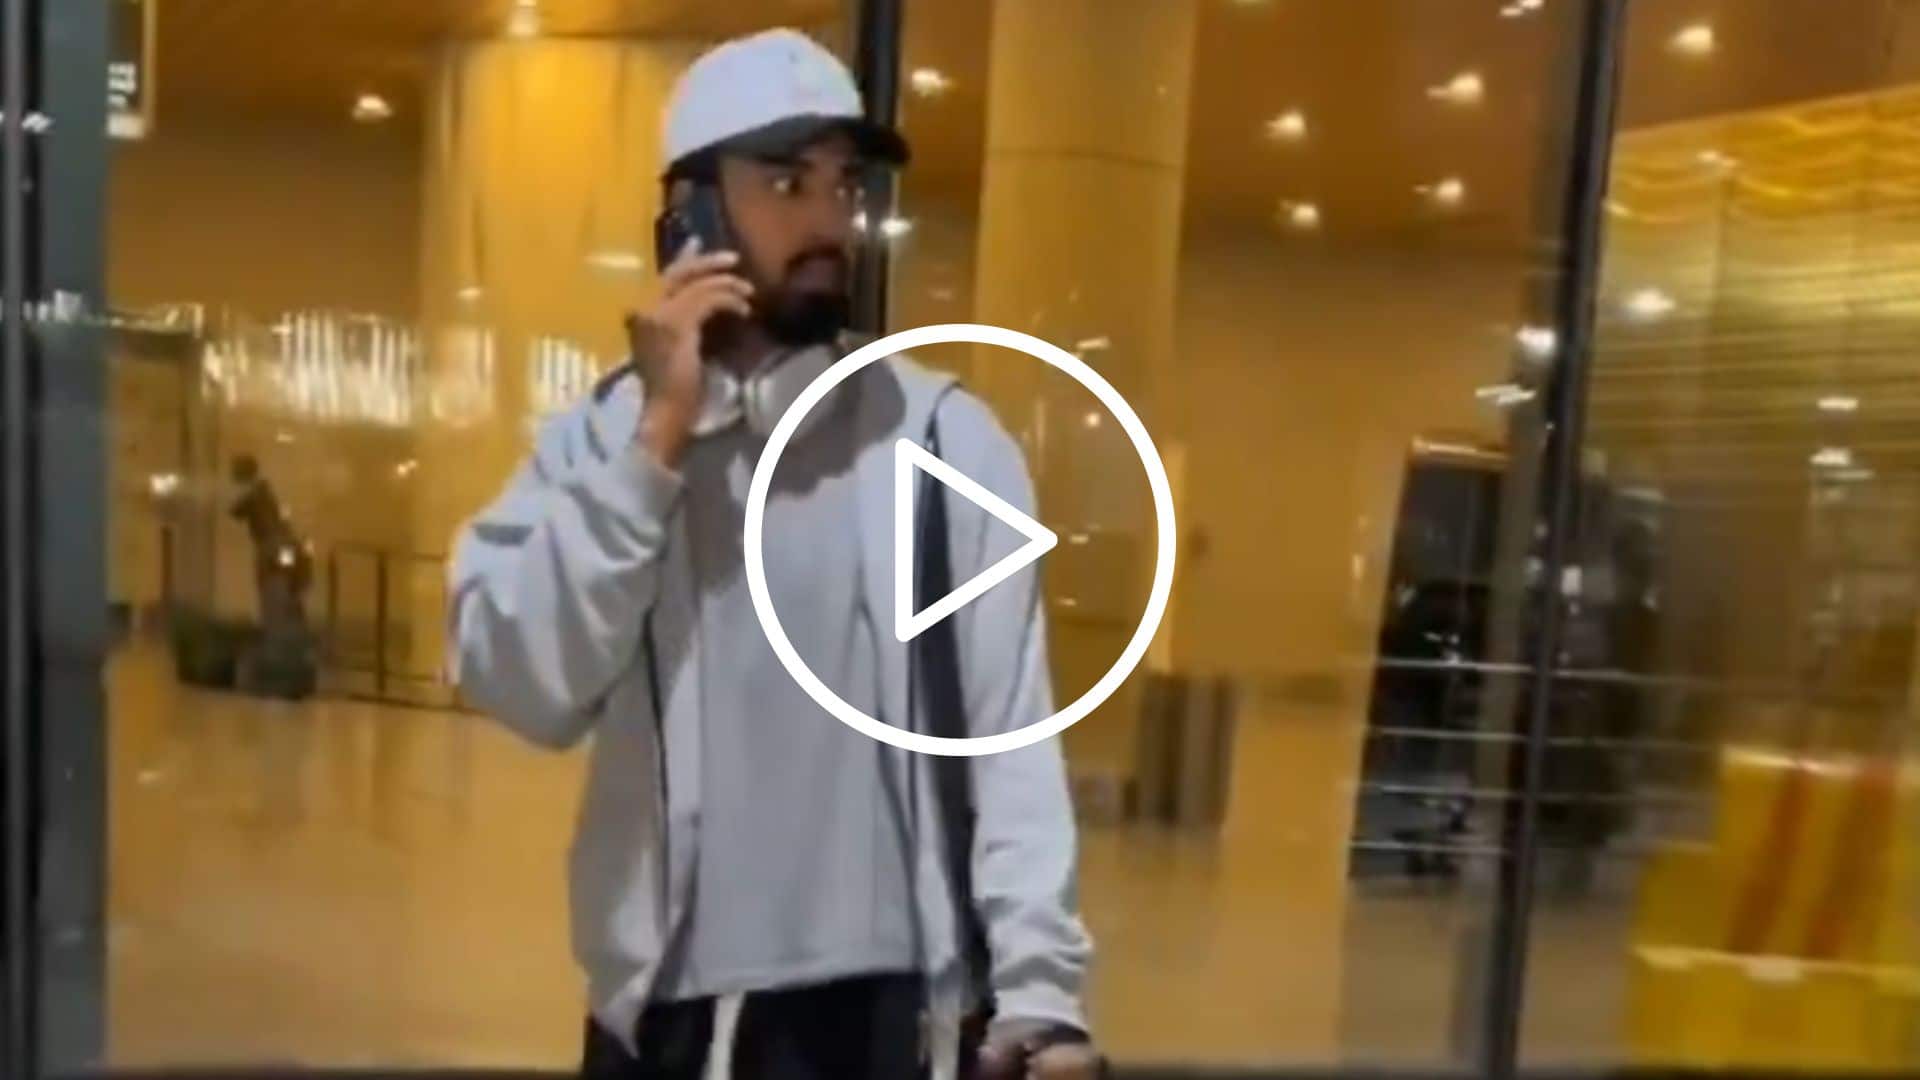 [Watch] KL Rahul Boards On Fight To Ranchi; Video Goes Viral Ahead Of 4th Test Vs ENG